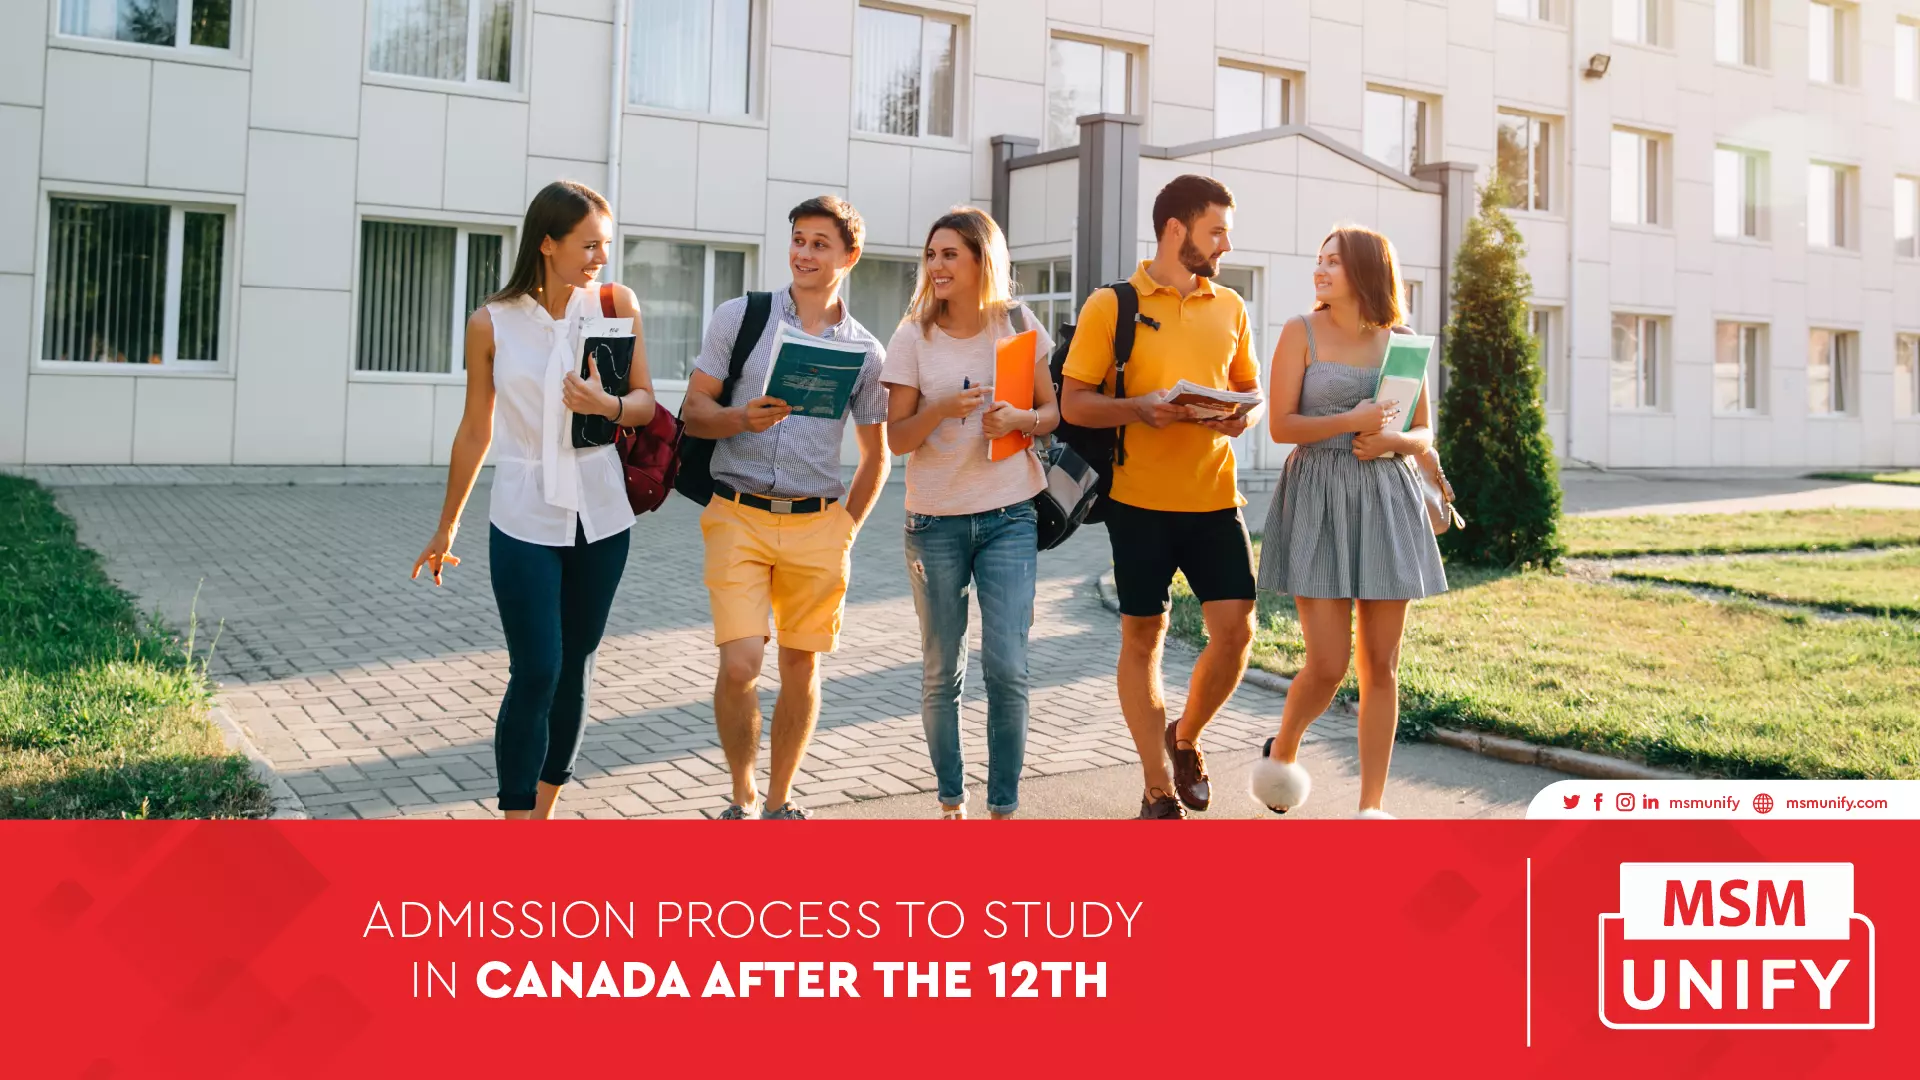 112522 MSM Unify Admission Process to Study in Canada After the 12th 01